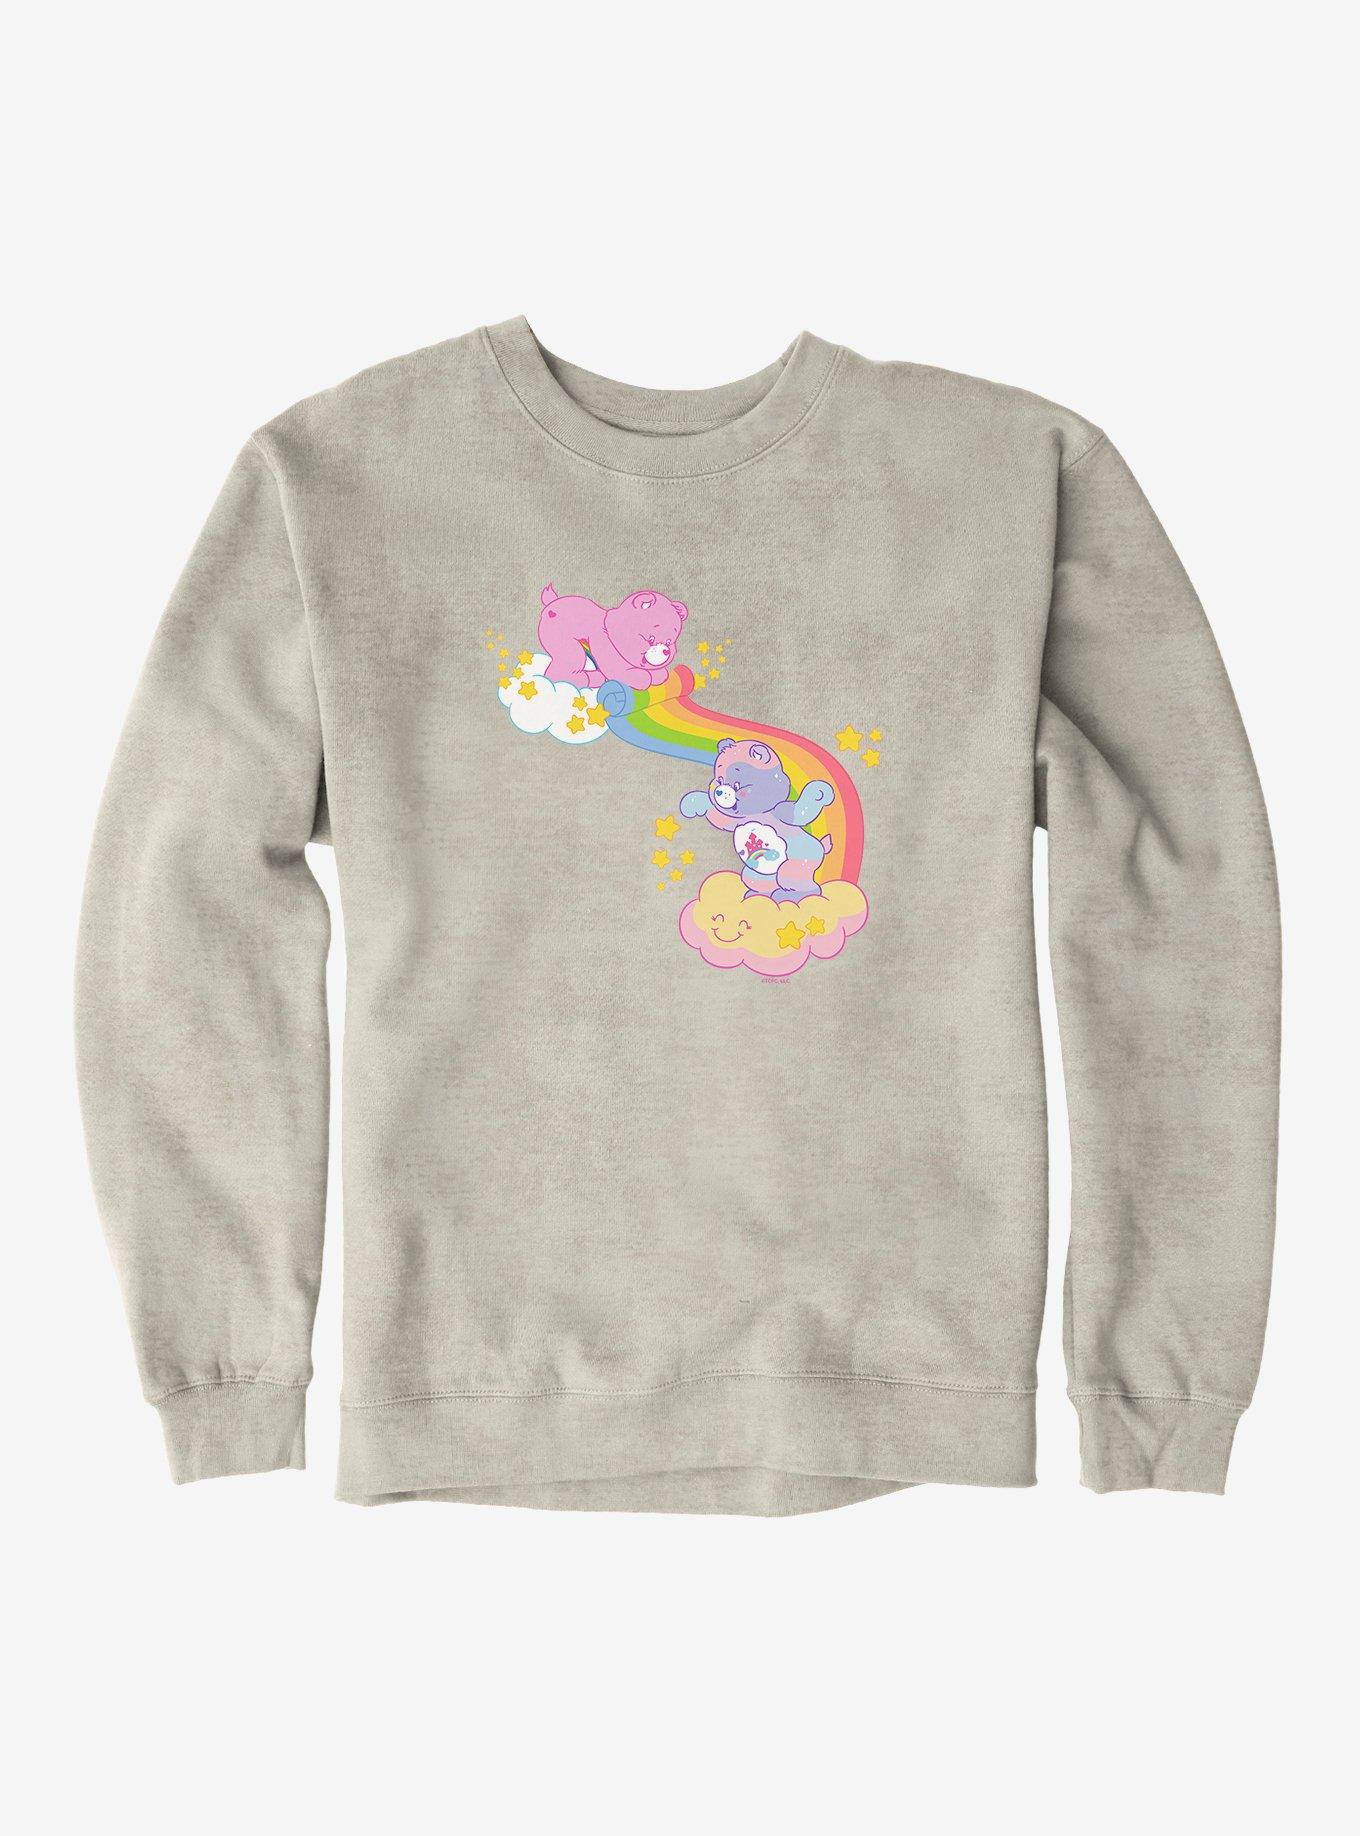 Care Bears In The Clouds Sweatshirt, OATMEAL HEATHER, hi-res